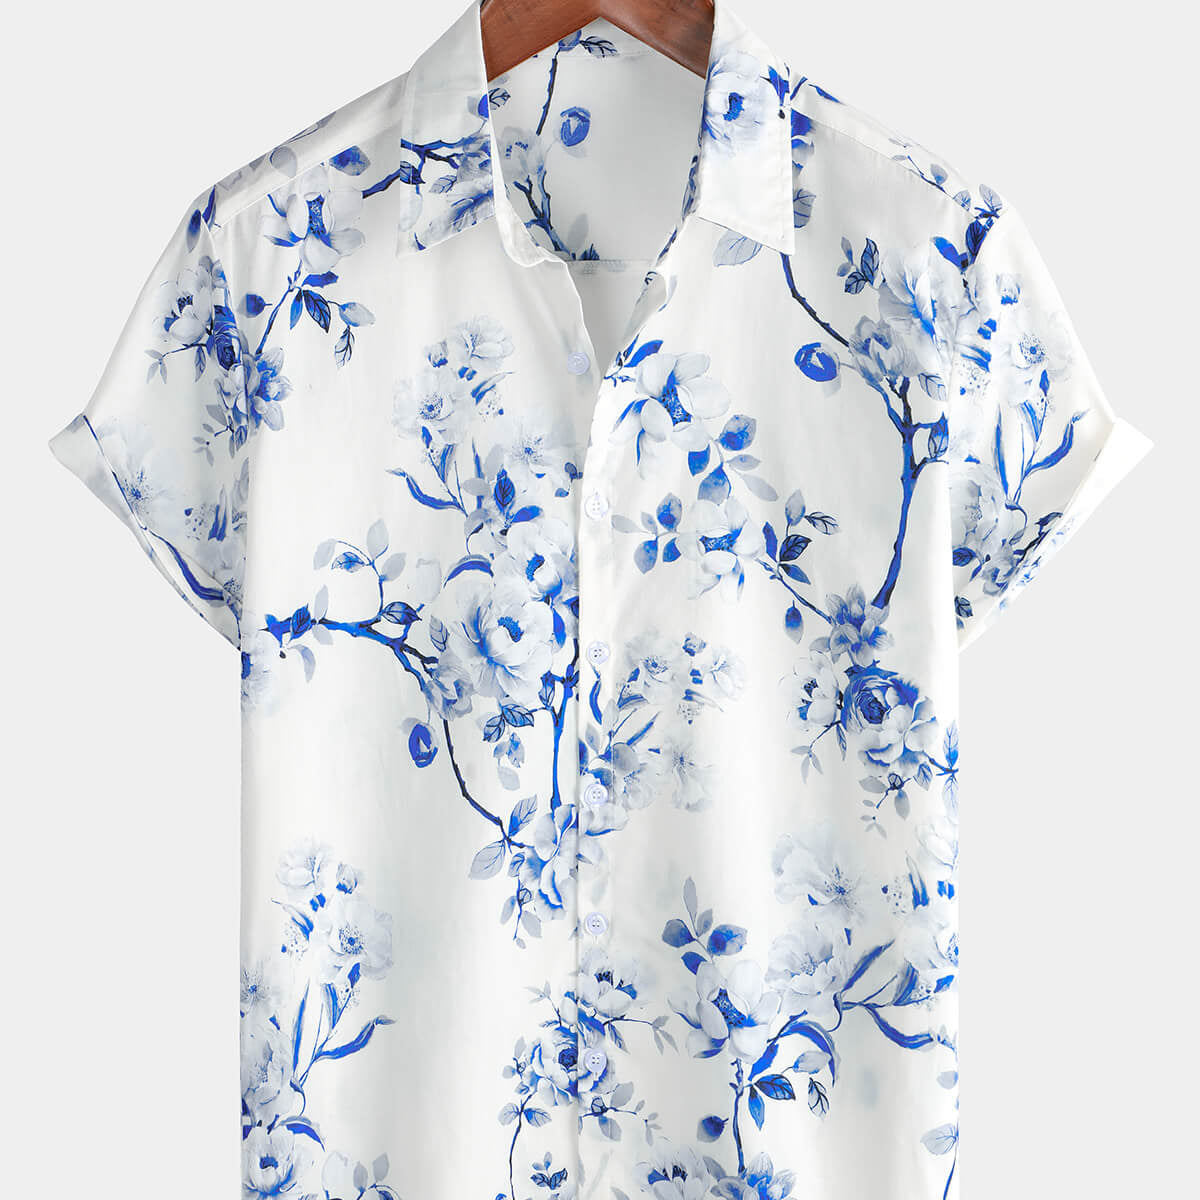 Men's Floral Holiday Casual Breathable Cotton Short Sleeve Button Up Shirt